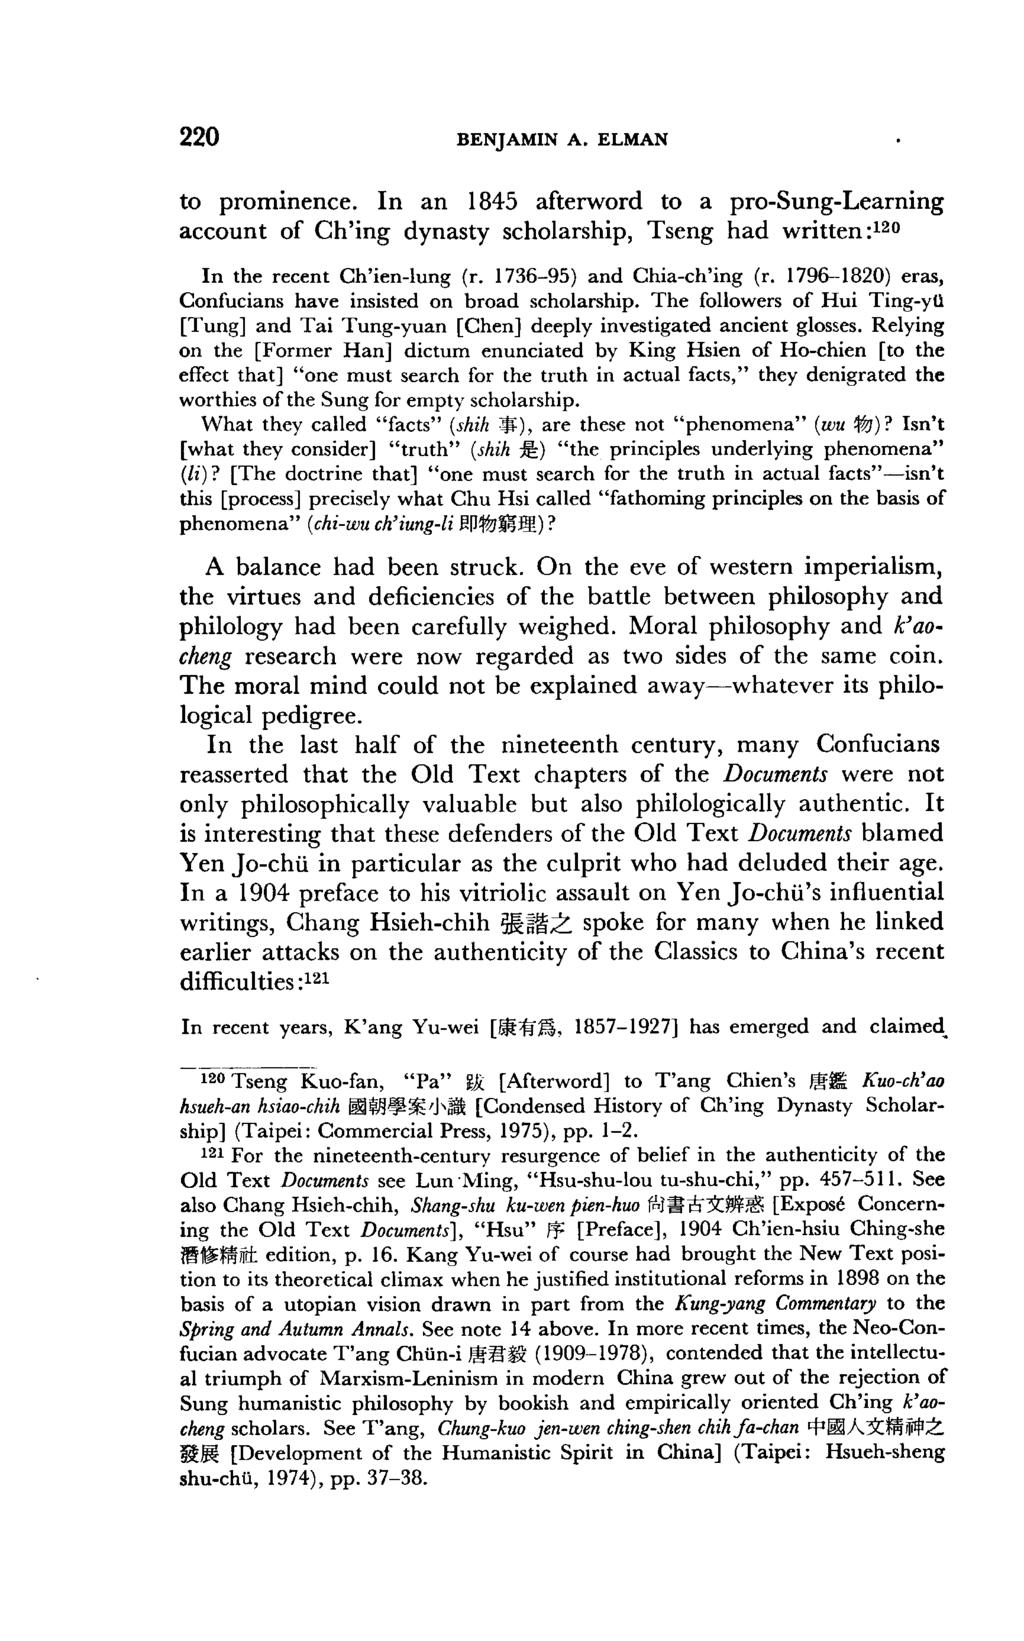 220 to prominence. In an 1845 afterword to a pro-sung-learning account of Ch'ing dynasty scholarship, Tseng had written :120 In the recent Ch'ien-lung (r. 1736-95) and Chia-ch'ing (r.